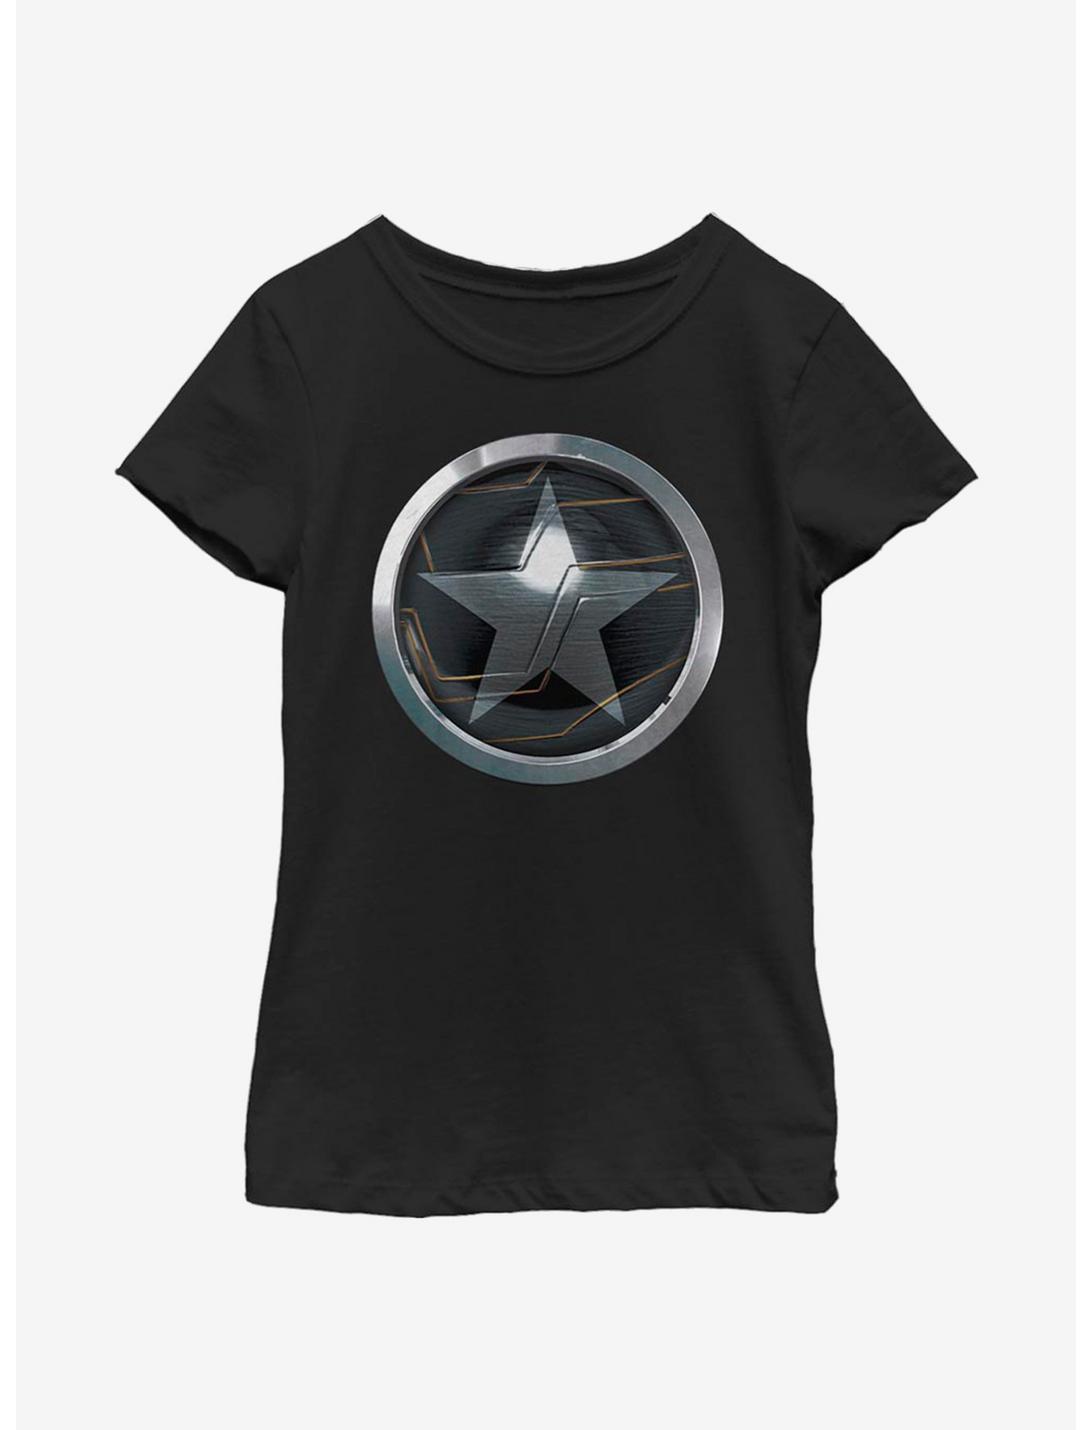 Marvel The Falcon And The Winter Soldier Logo Youth Girls T-Shirt, BLACK, hi-res